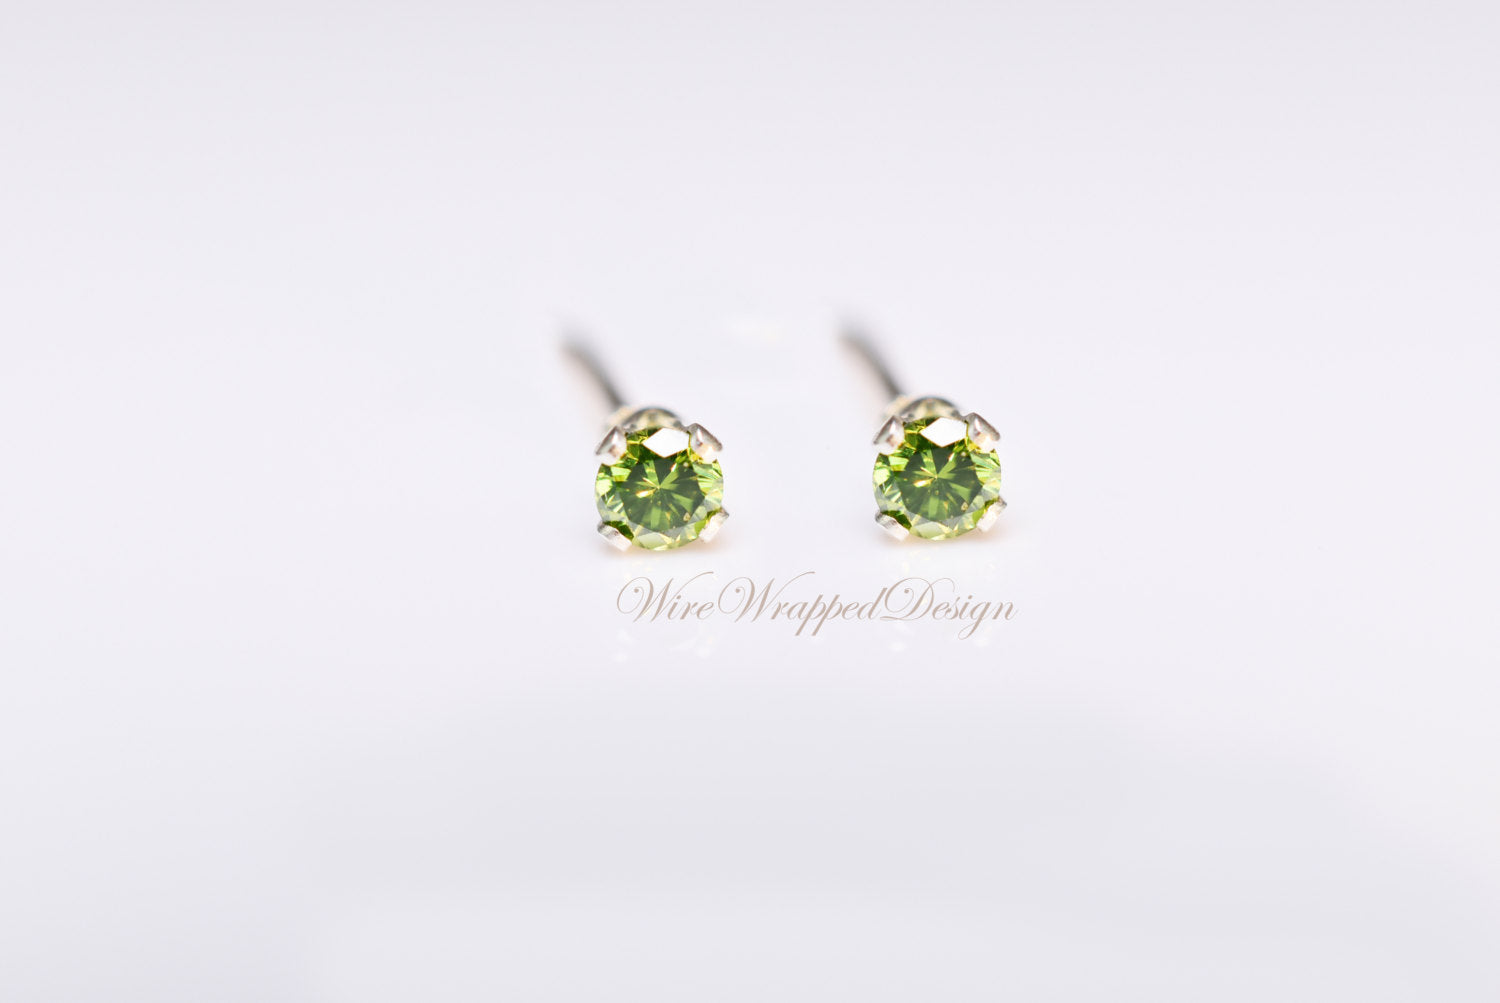 Genuine GREEN DIAMOND Earring Studs 2mm 0.08tcw Post 14k Solid Gold (Yellow, Rose or White), Platinum, Silver Lobe Cartilage Helix Tragus